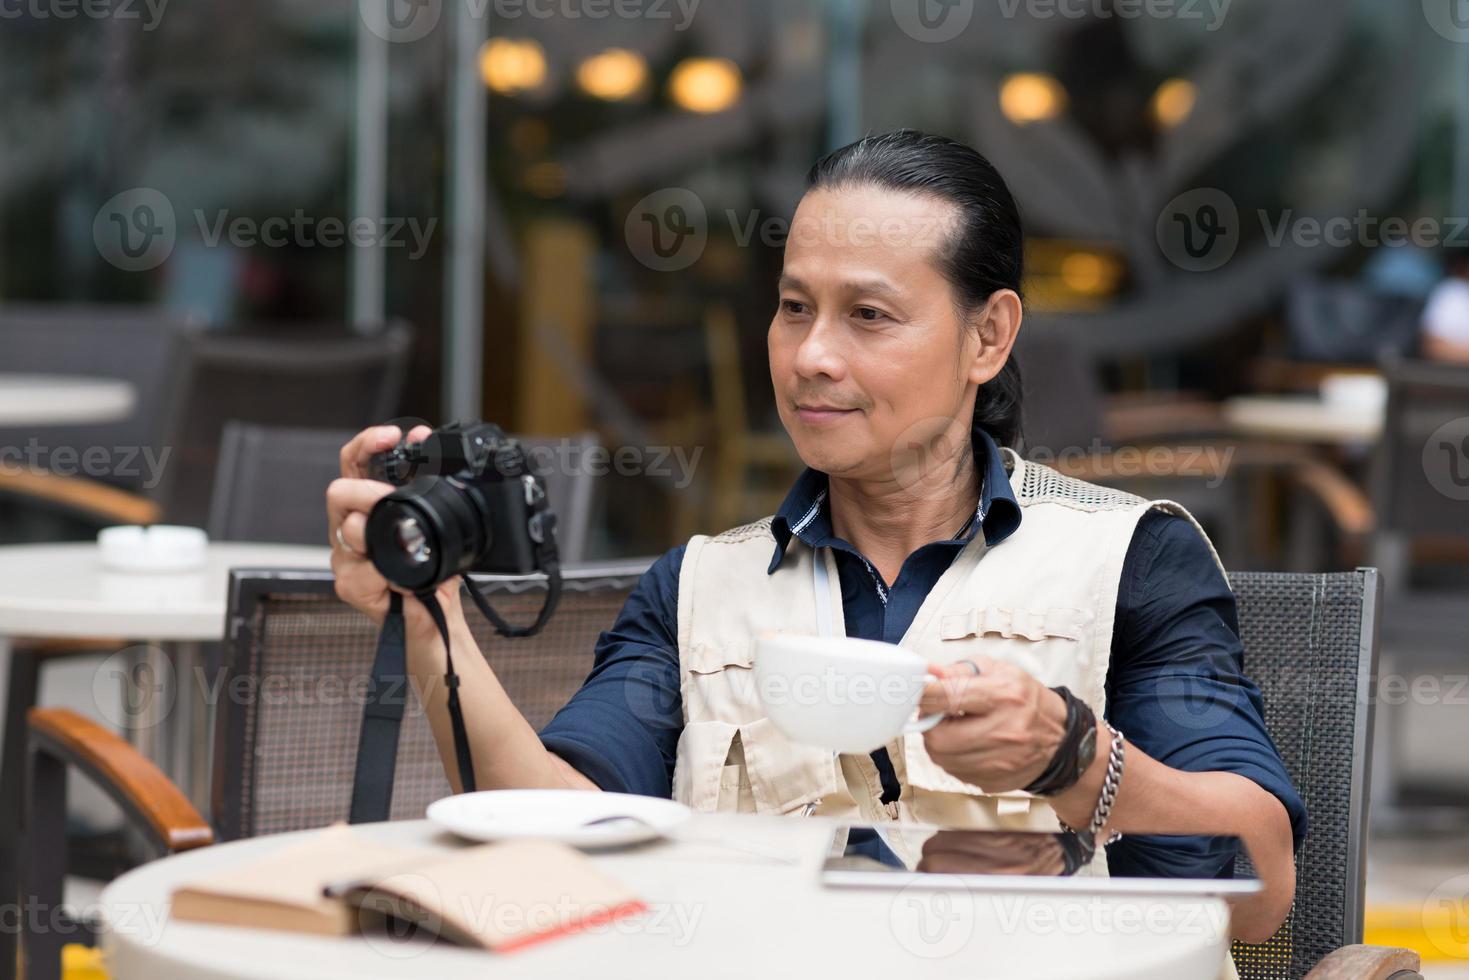 Photographer in a cafe photo